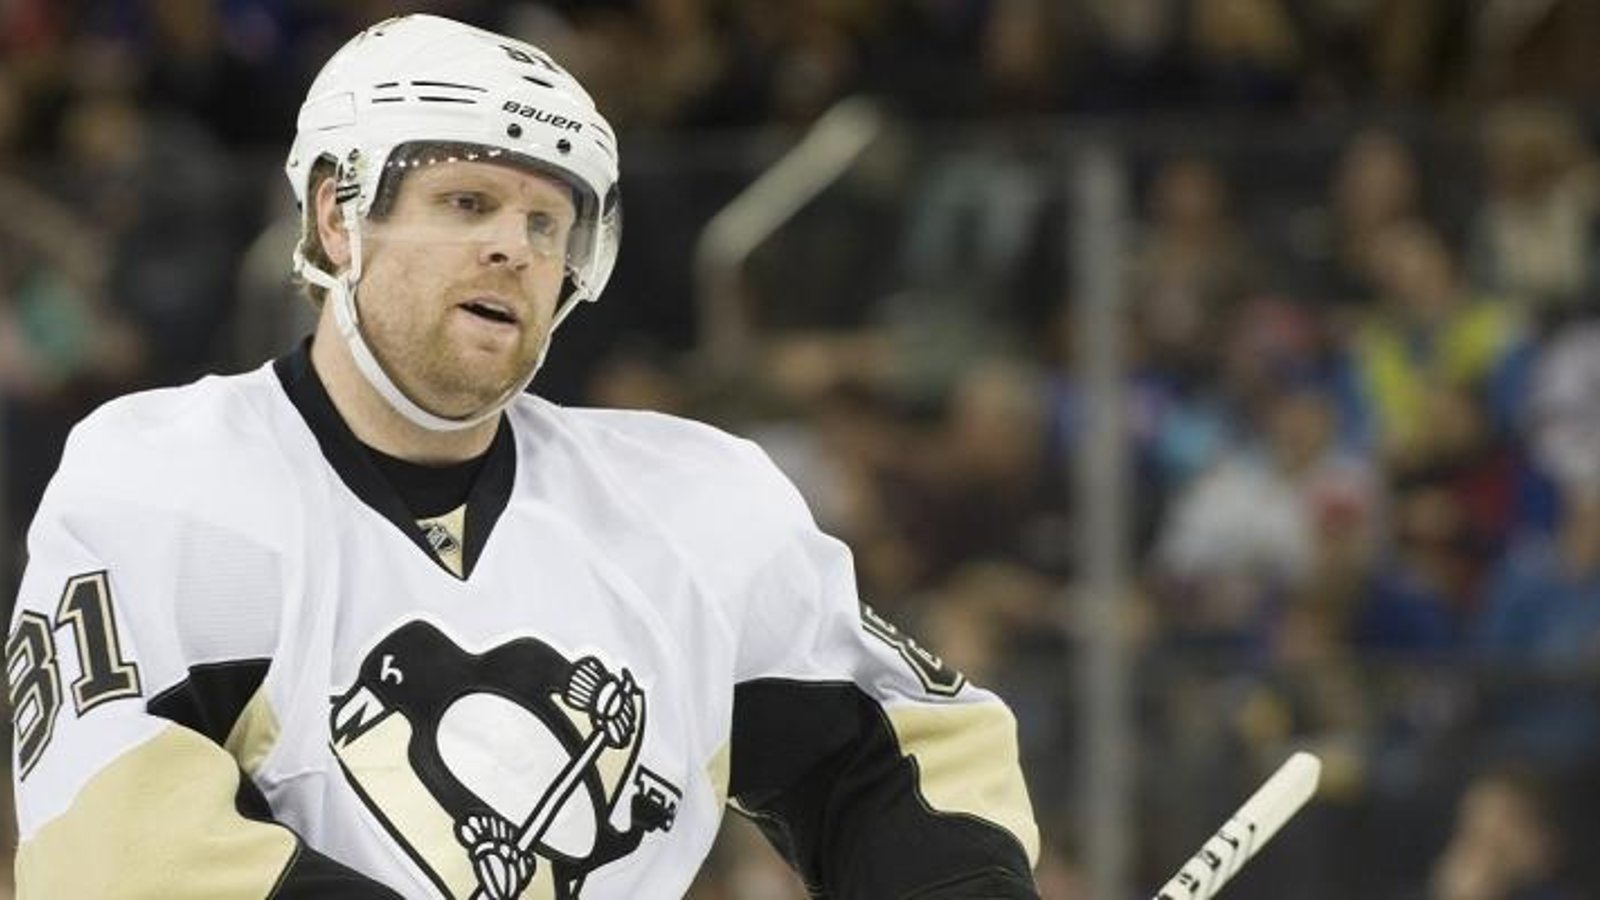 Phil Kessel gives surprising answer when asked if he will bring the Cup to Toronto.